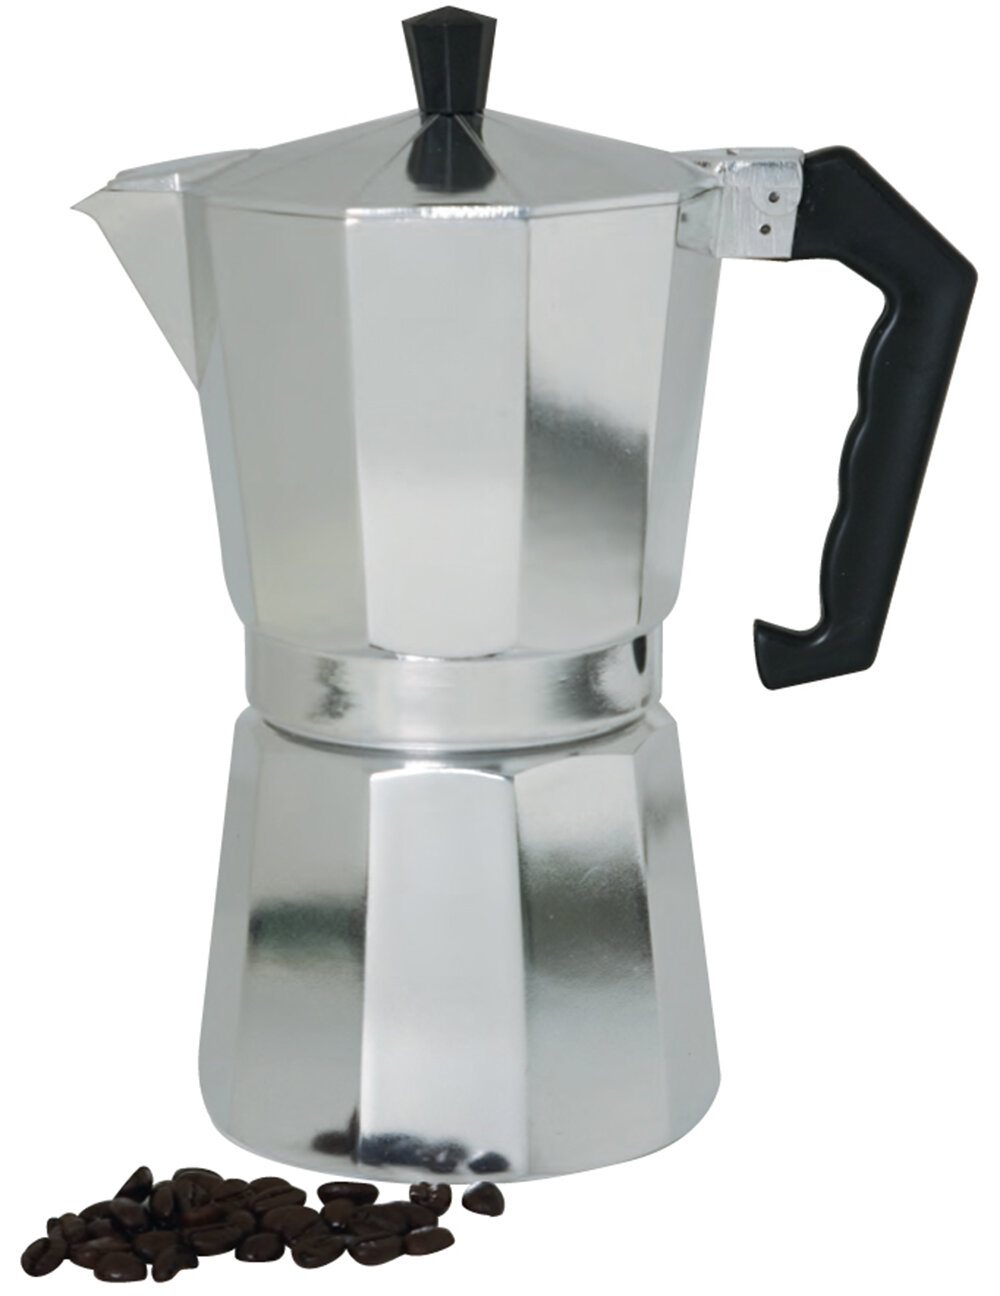 Primula Premium Stainless Steel Stovetop Espresso and Coffee Maker, 6-Cup